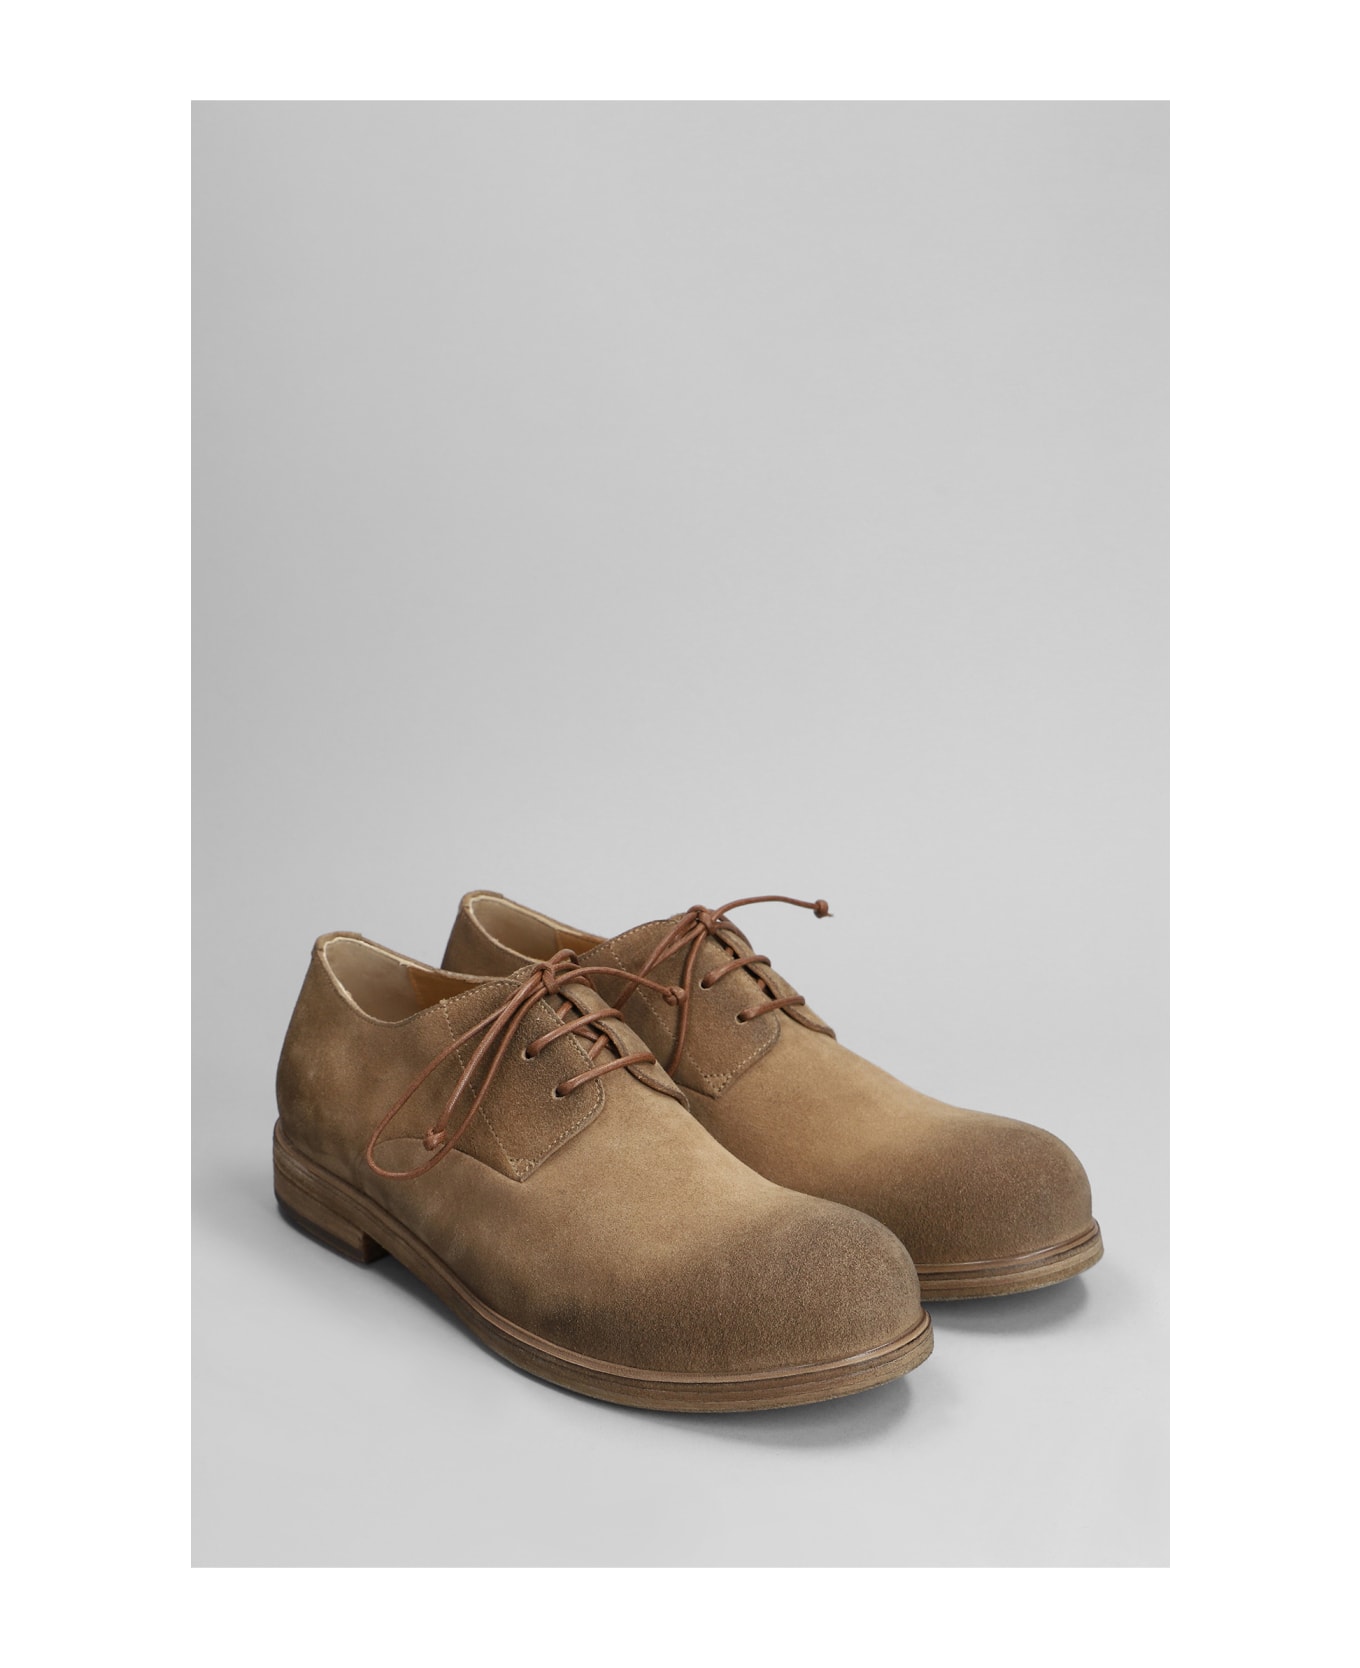 Marsell Lace Up Shoes In Beige Suede - beige